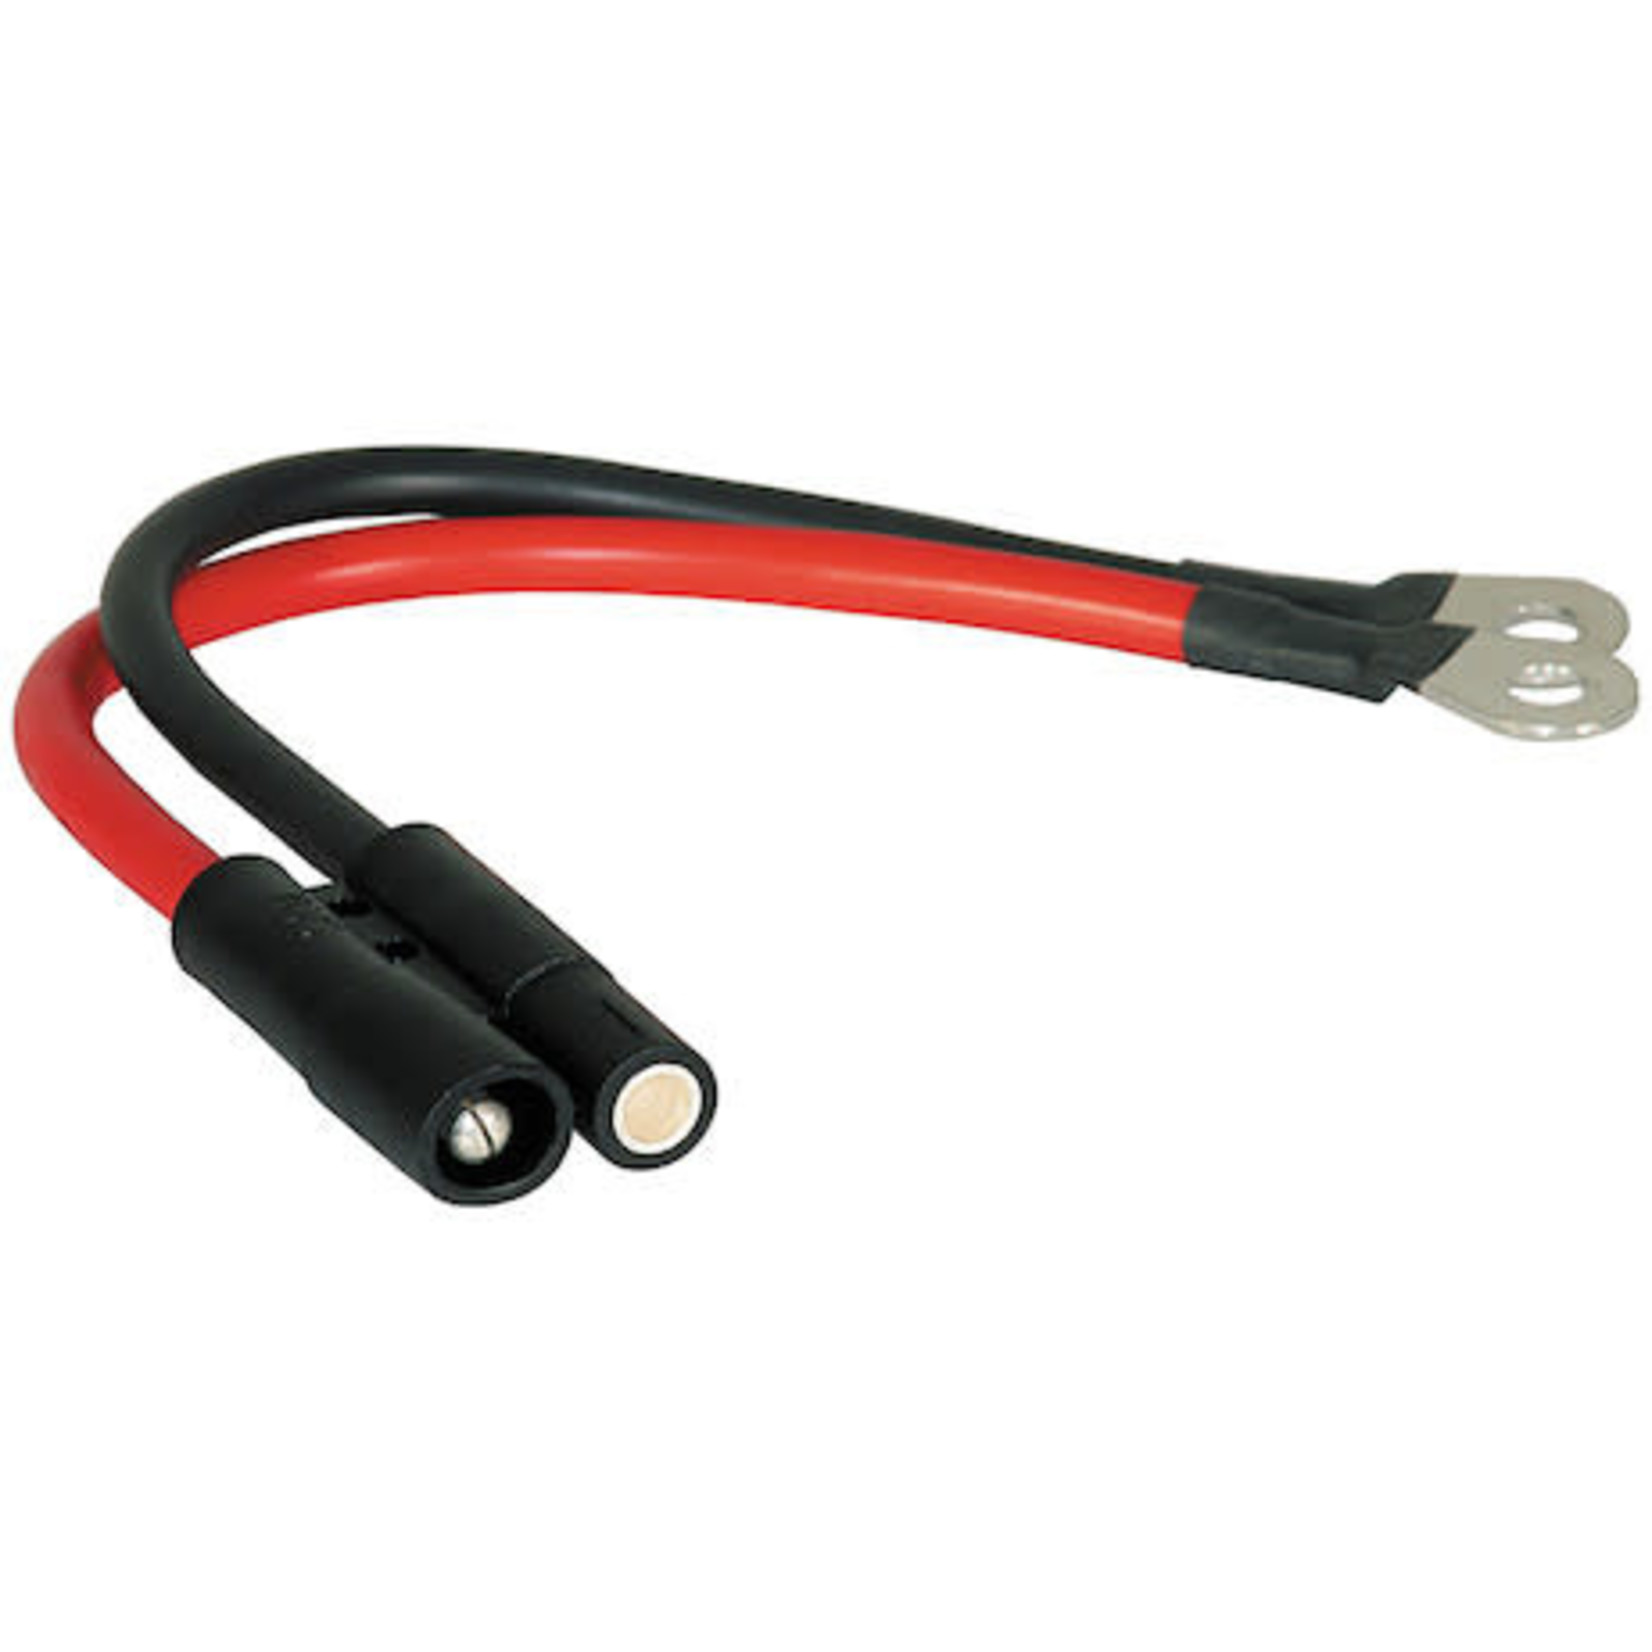 SAM SAM Cable And Plug Assembly-Replaces Meyer #15670